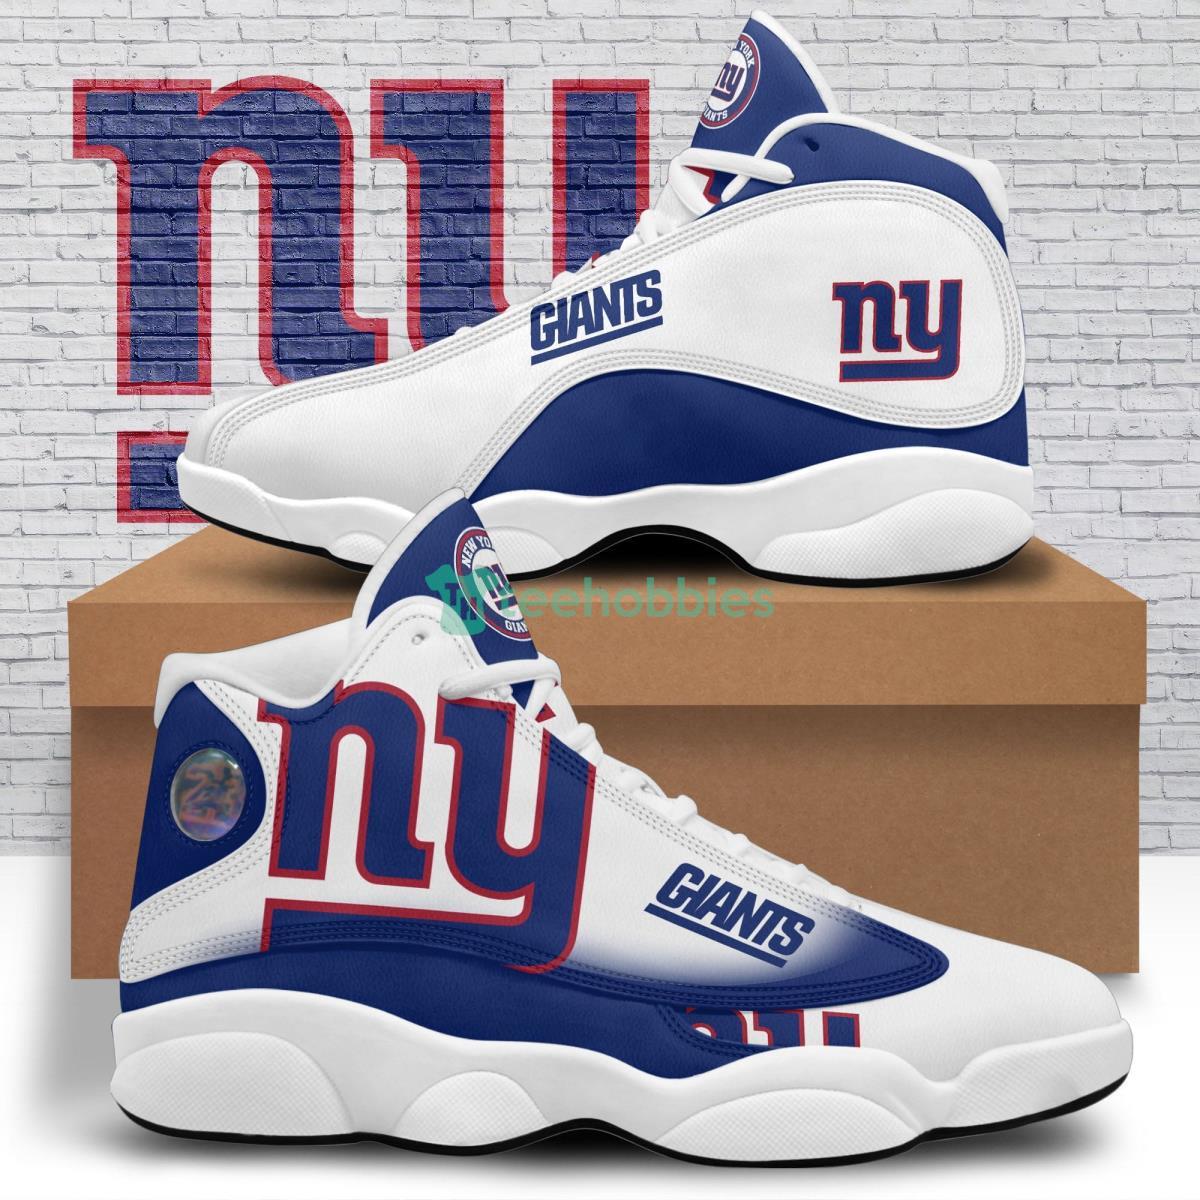 New York Giants Air Jordan 13 Shoes Running Casual Sneakers Gift For Fans Product Photo 1